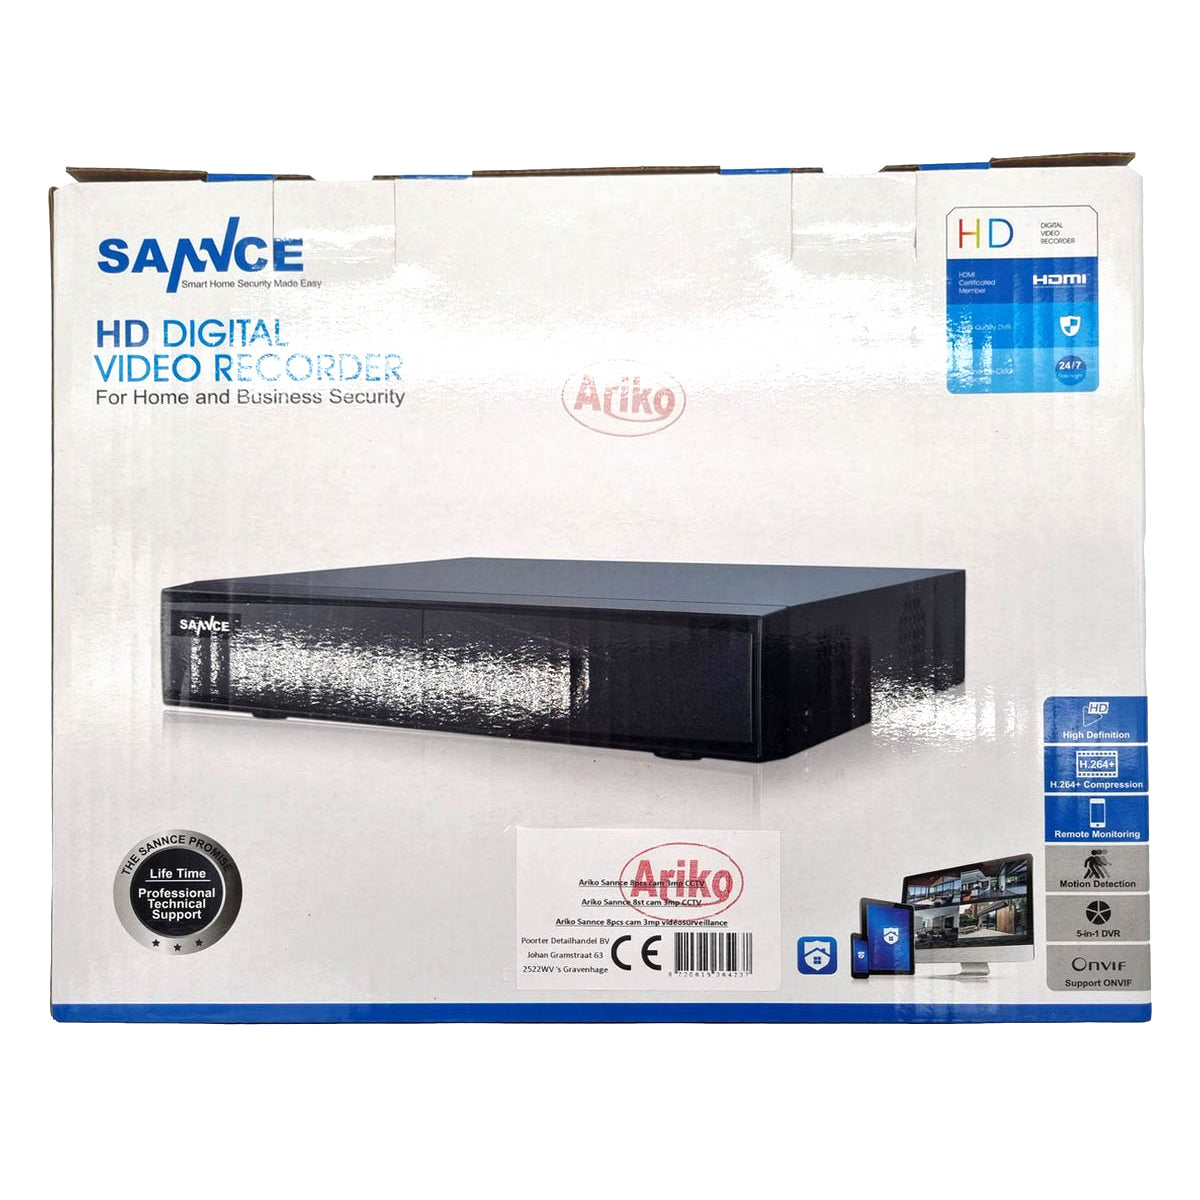 <tc>Ariko</tc> Sannce Camera CCTV system, 8 x Black high quality 3MP security cameras, Night vision 25 mtr, View recorded and live images online, including 1TB hard drive - Dutch helpdesk